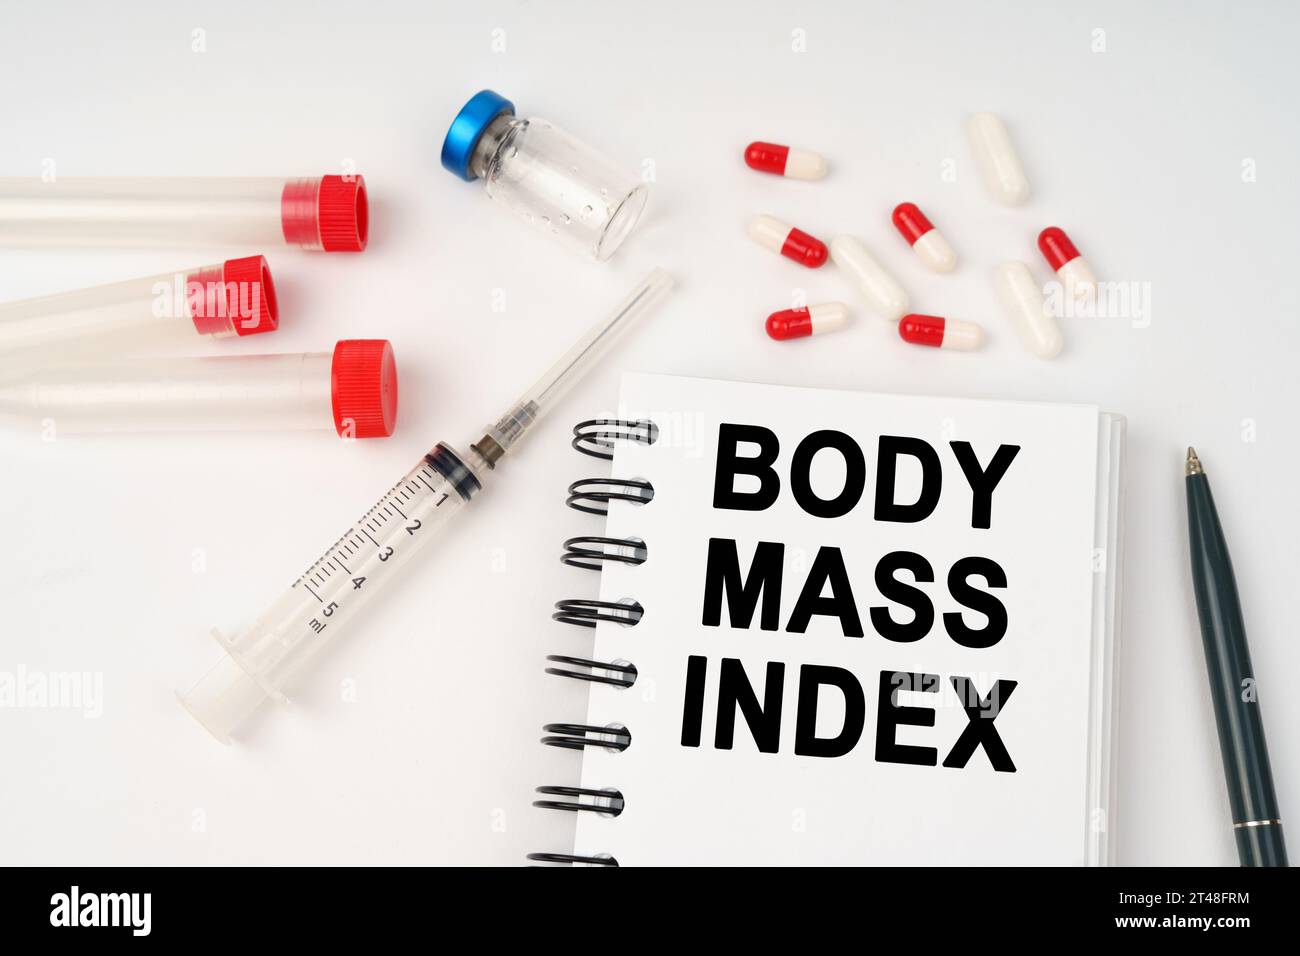 https://c8.alamy.com/comp/2T48FRM/medical-concept-on-the-table-are-pills-injections-a-syringe-and-a-notepad-with-the-inscription-body-mass-index-2T48FRM.jpg